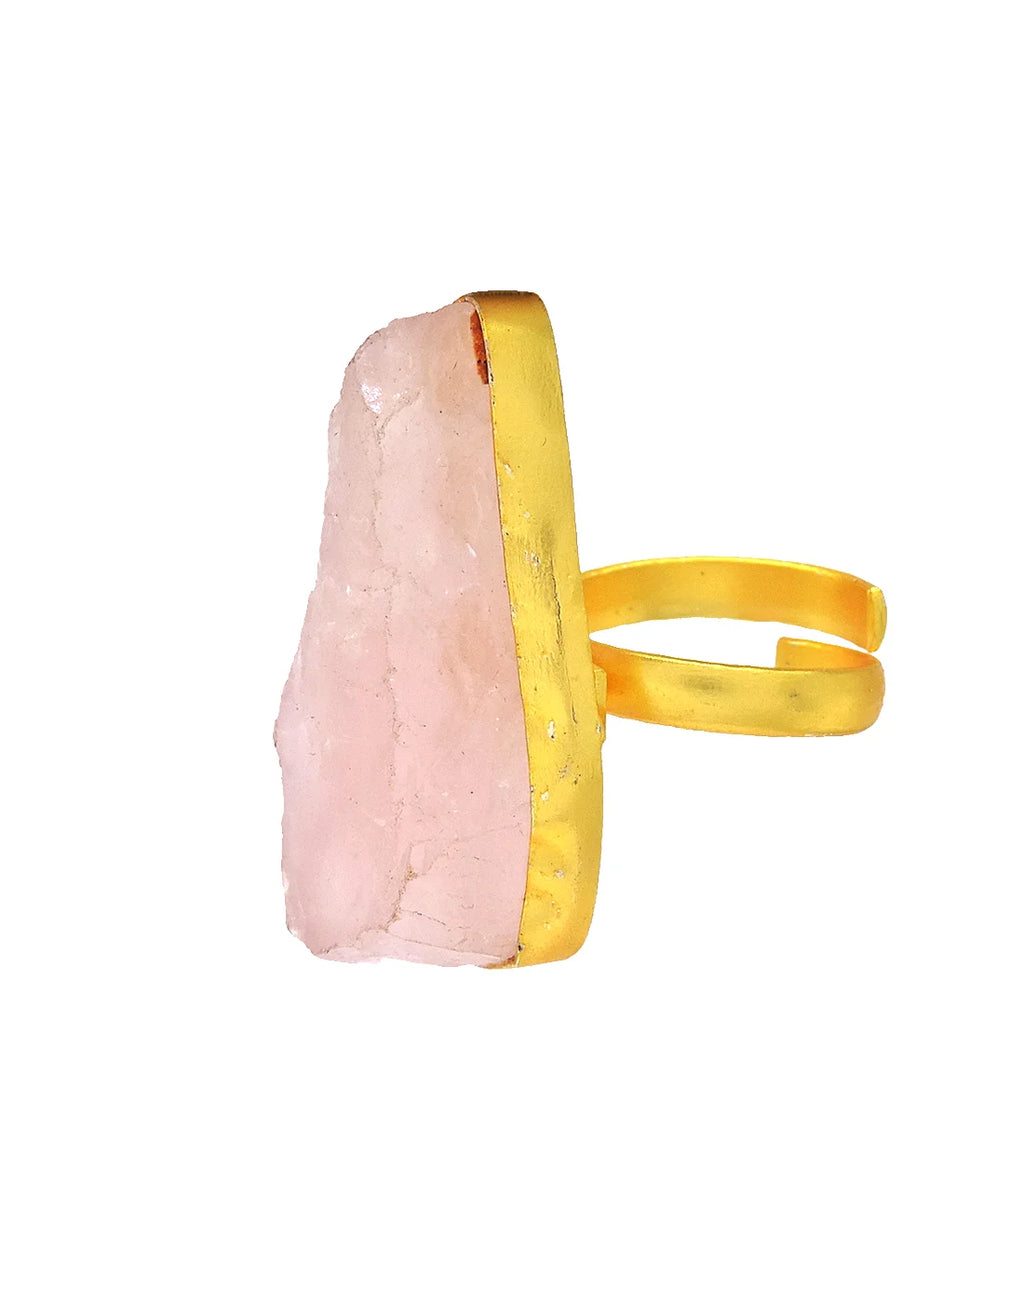 Abstract Rose Quartz Ring- Handcrafted Jewellery from Dori